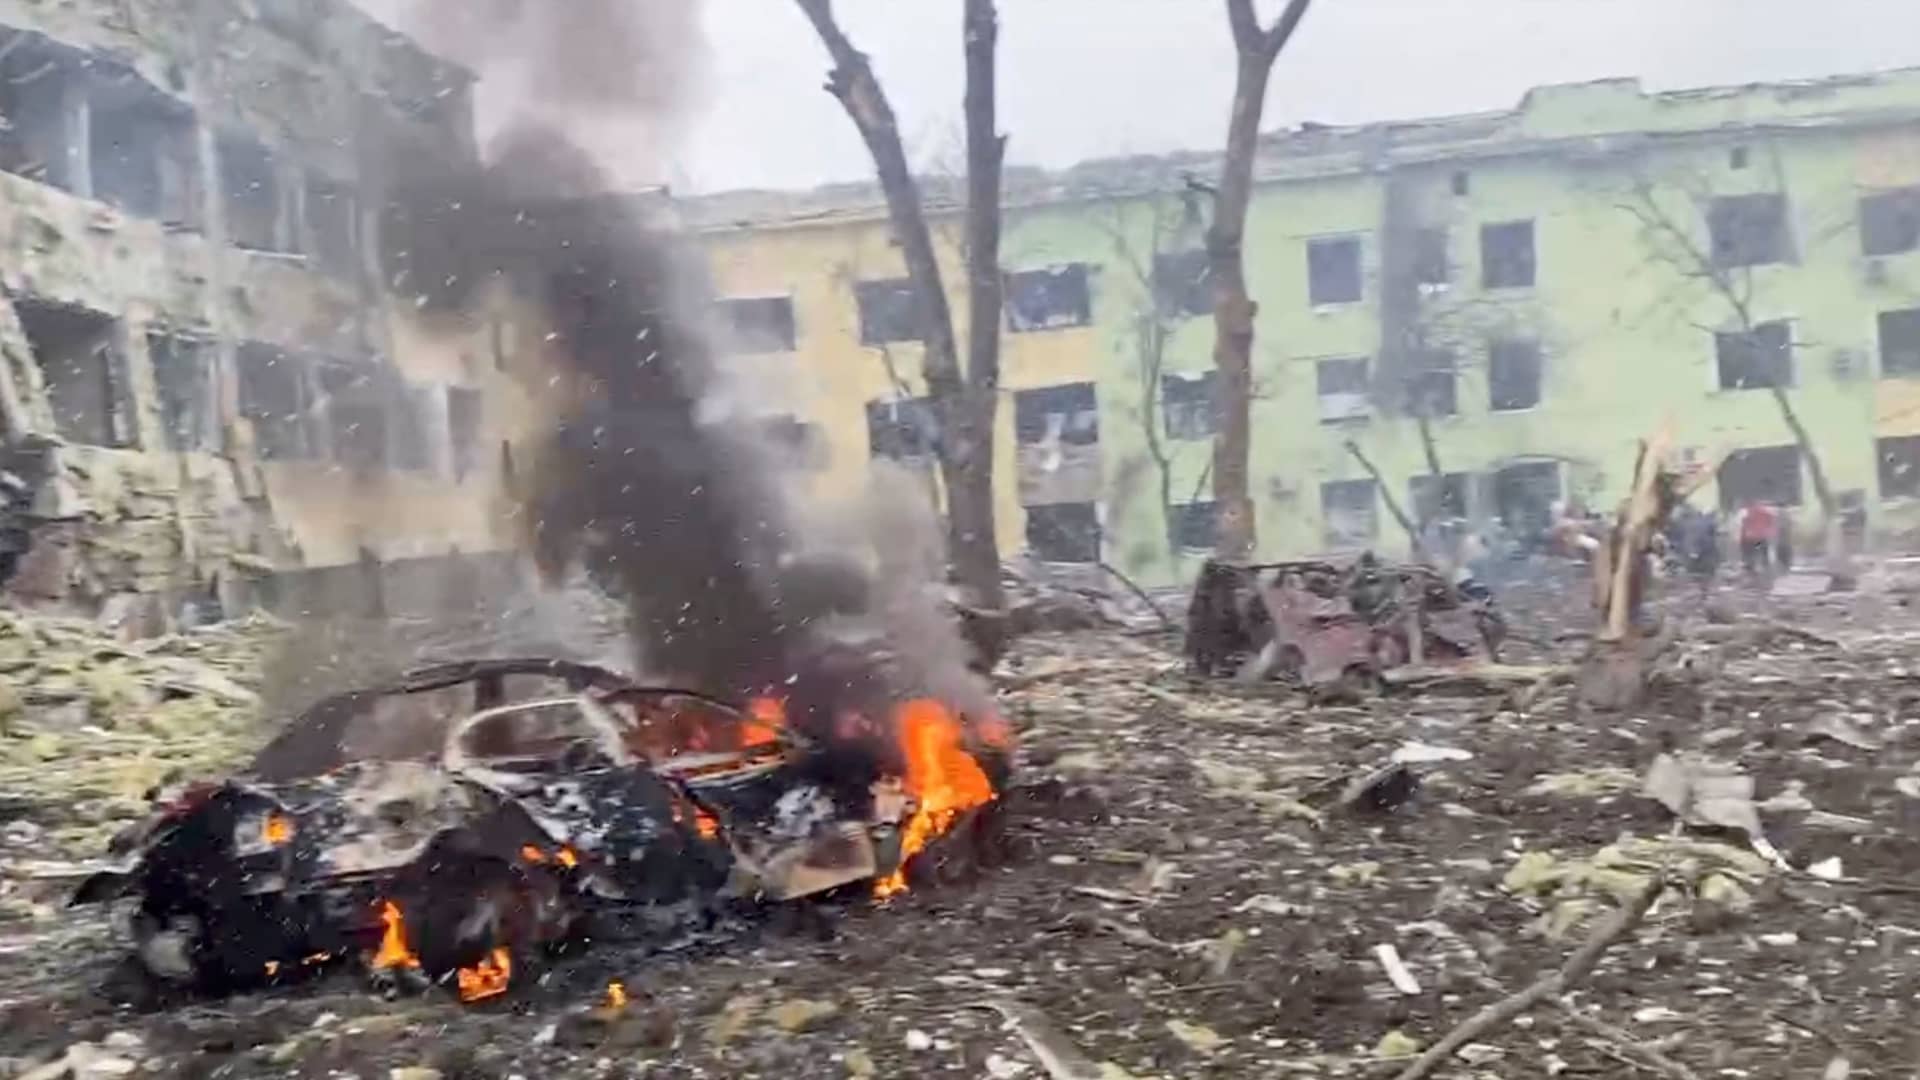 A car burns after the destruction of Mariupol children's hospital as Russia's invasion of Ukraine continues, in Mariupol, Ukraine, March 9, 2022 in this still image from a handout video obtained by Reuters.